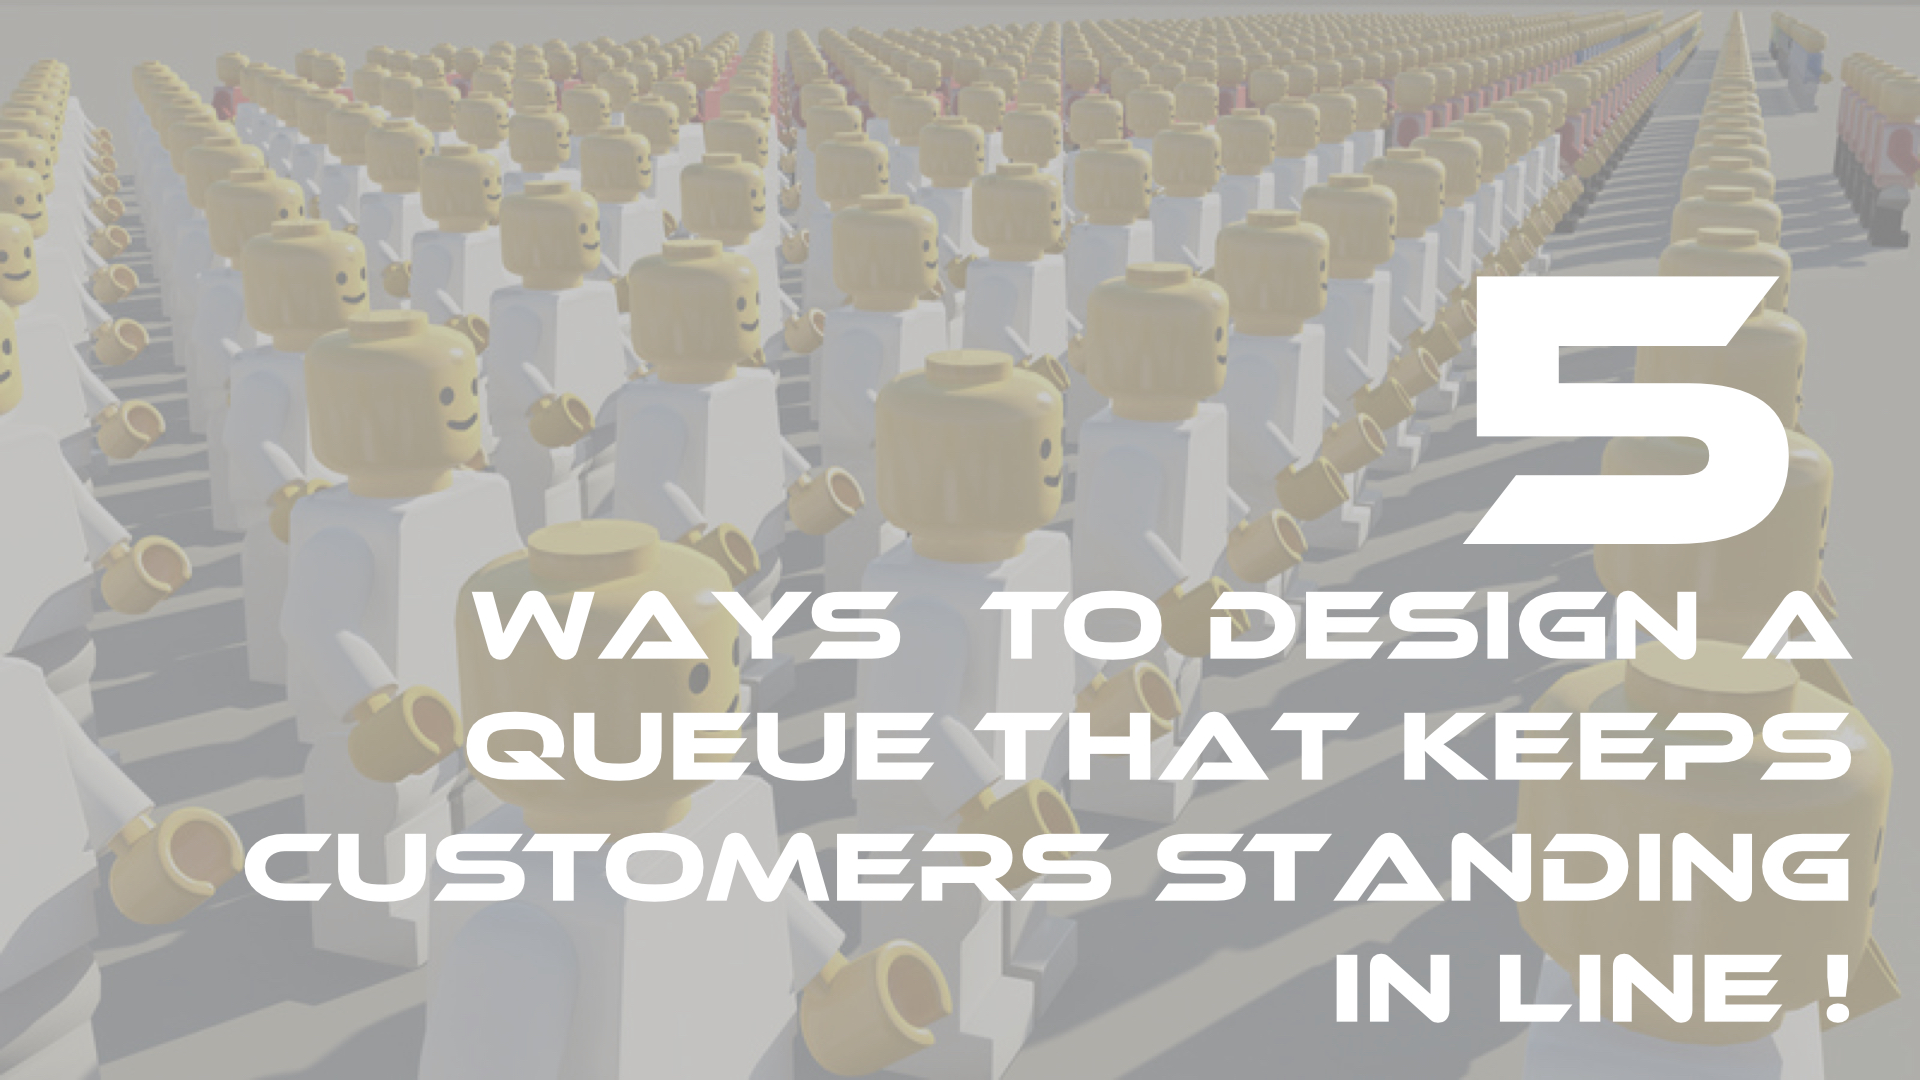 5 Ways to Design a Queue that Keeps Customers Standing in Line!